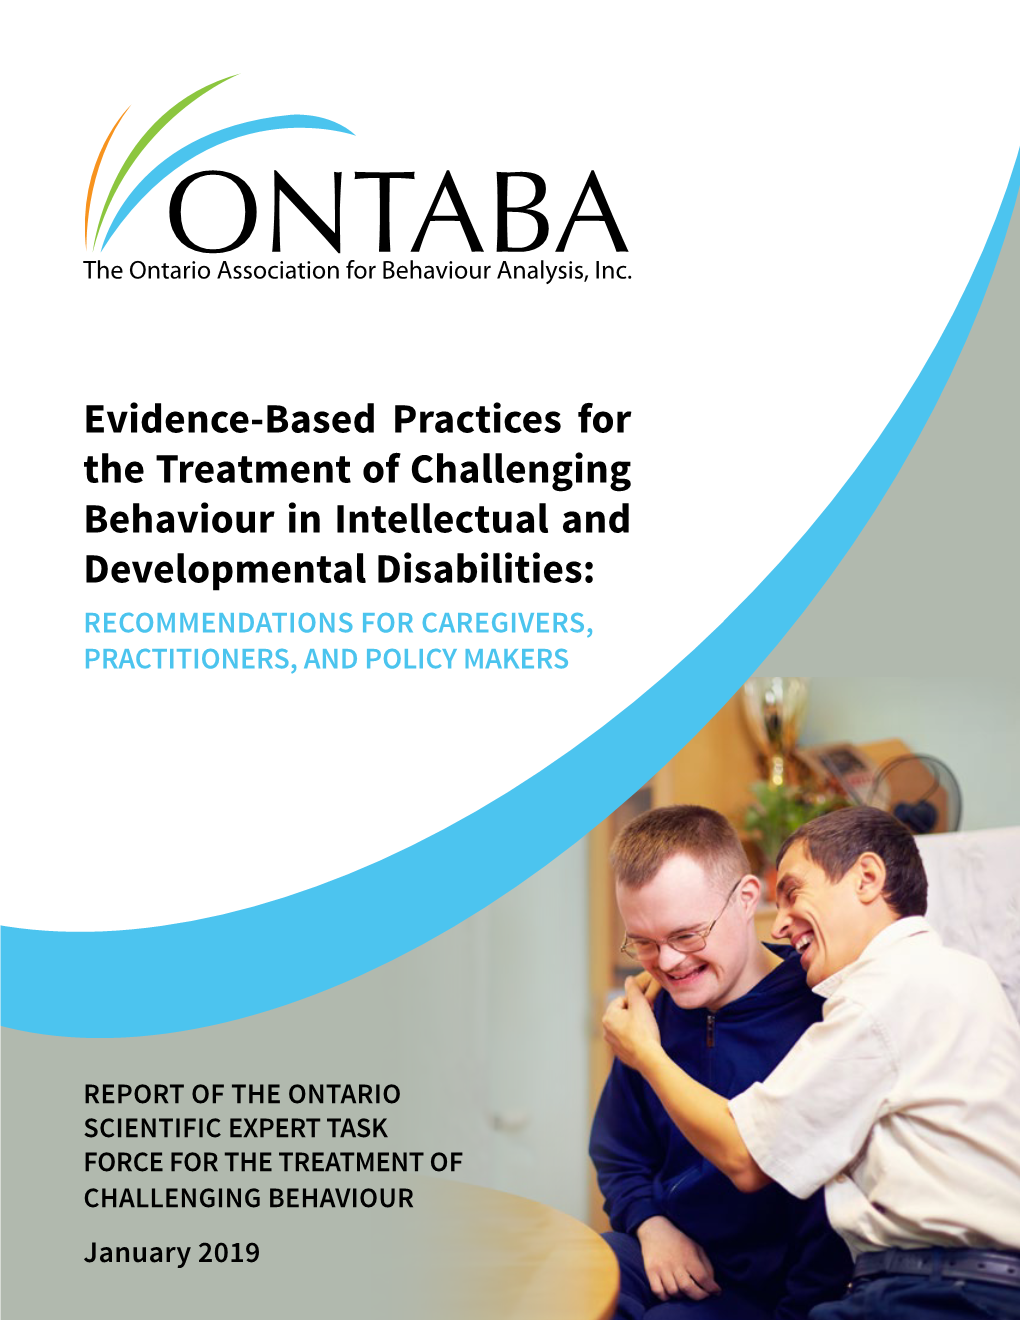 Evidence-Based Practices for the Treatment of Challenging